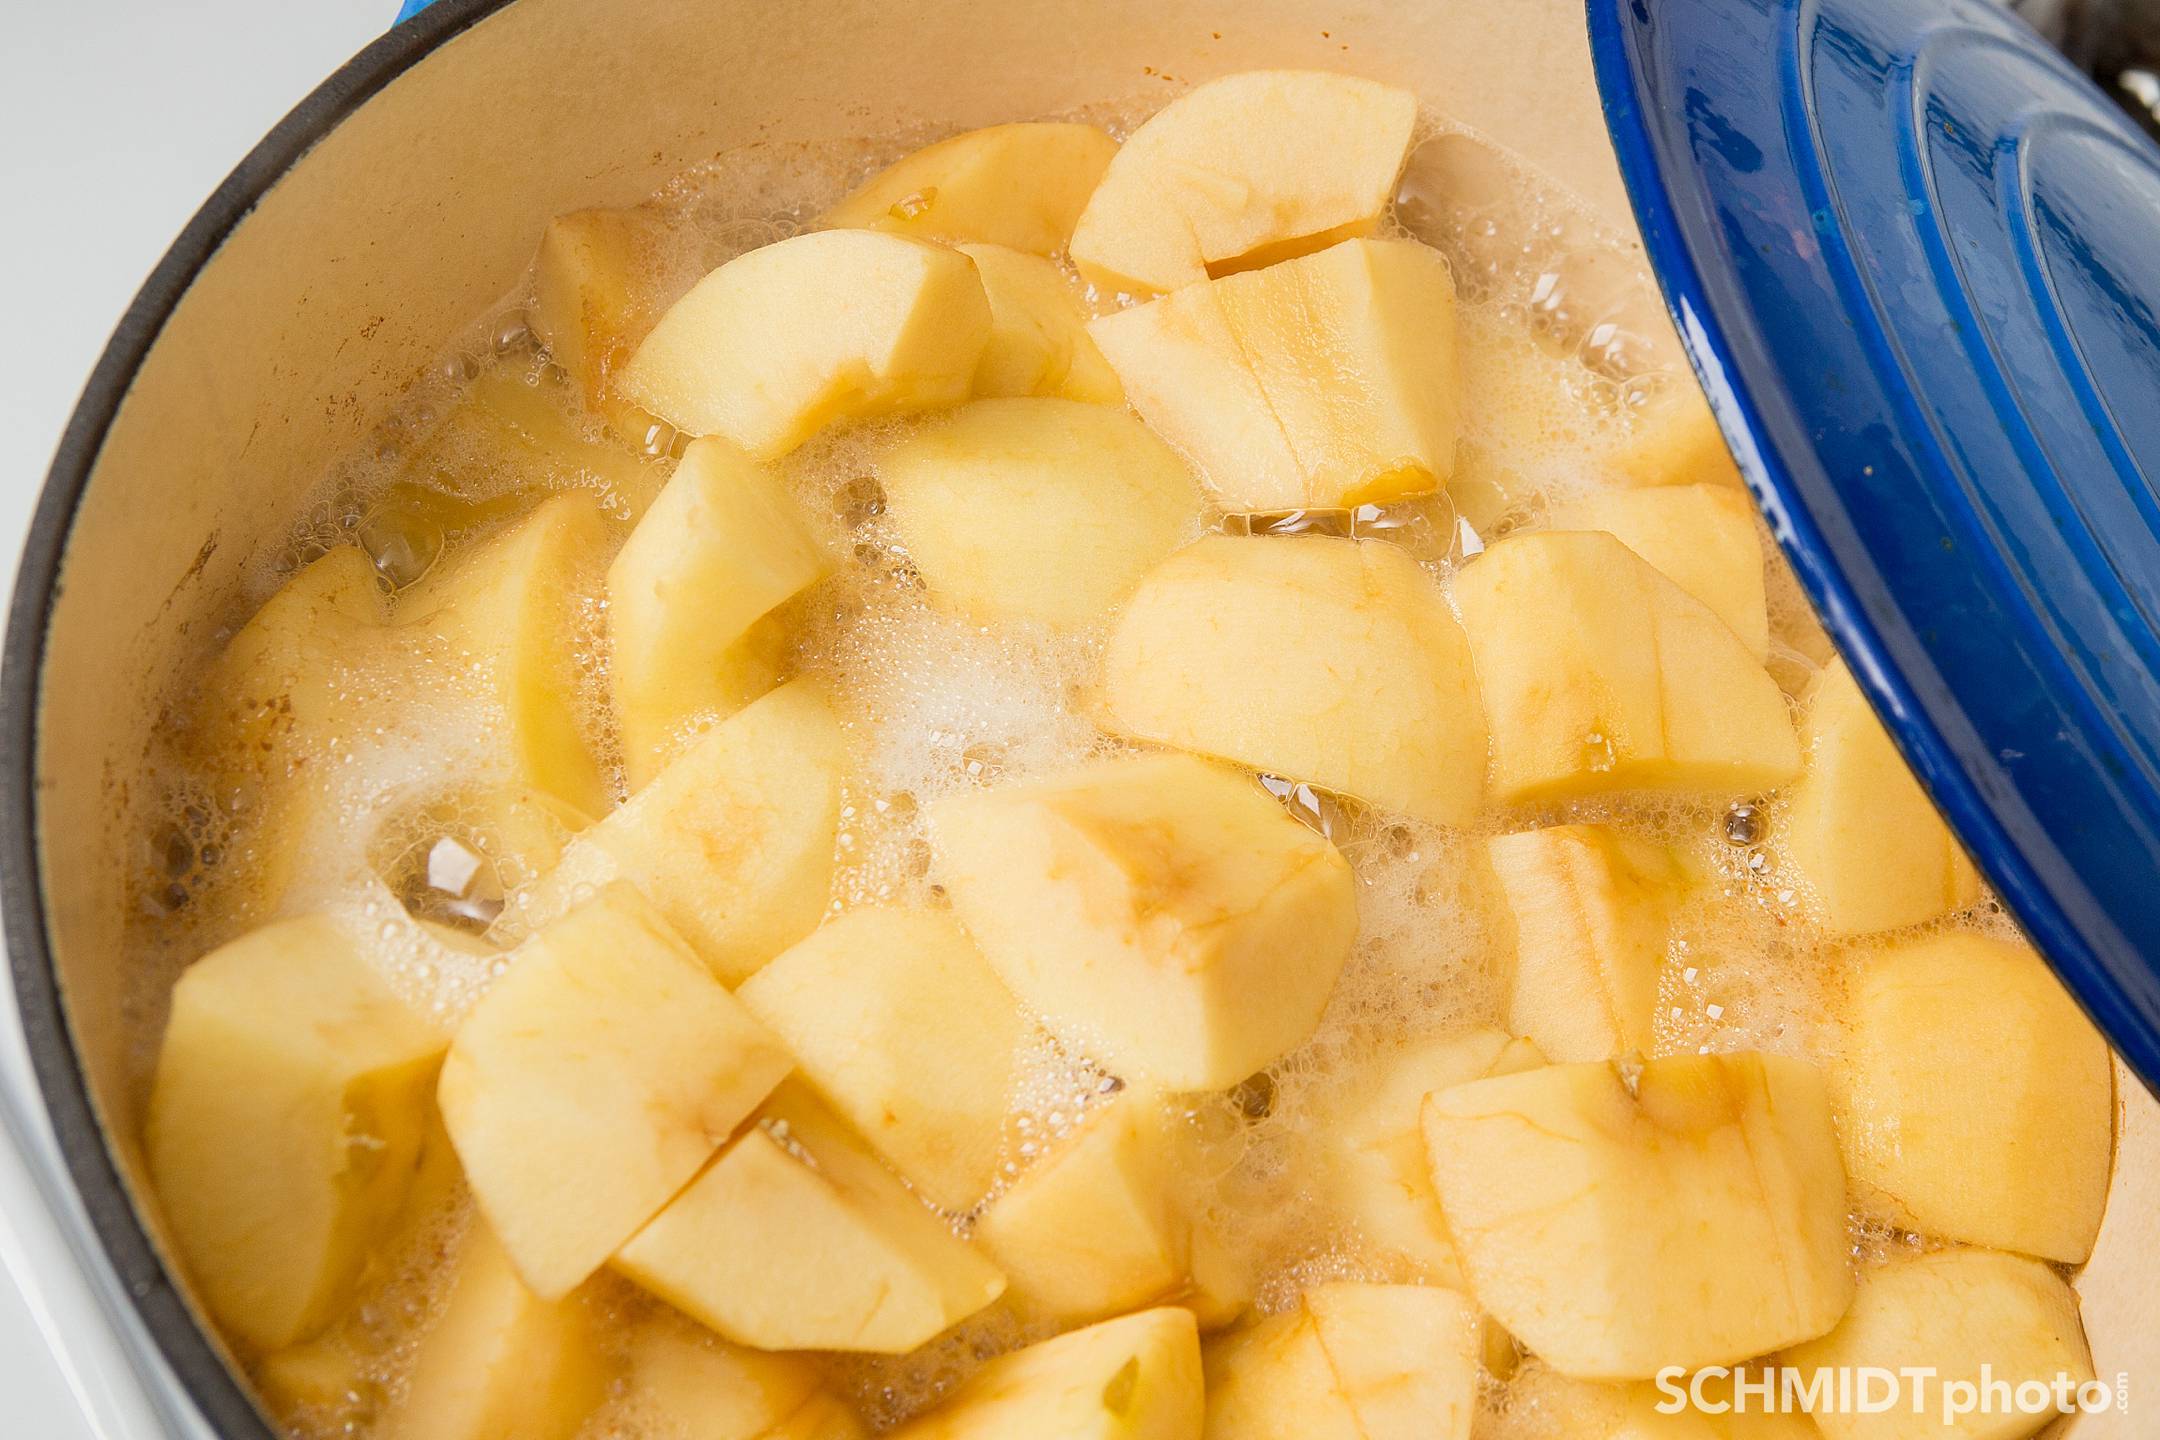 Make apple sauce at home with no special tools